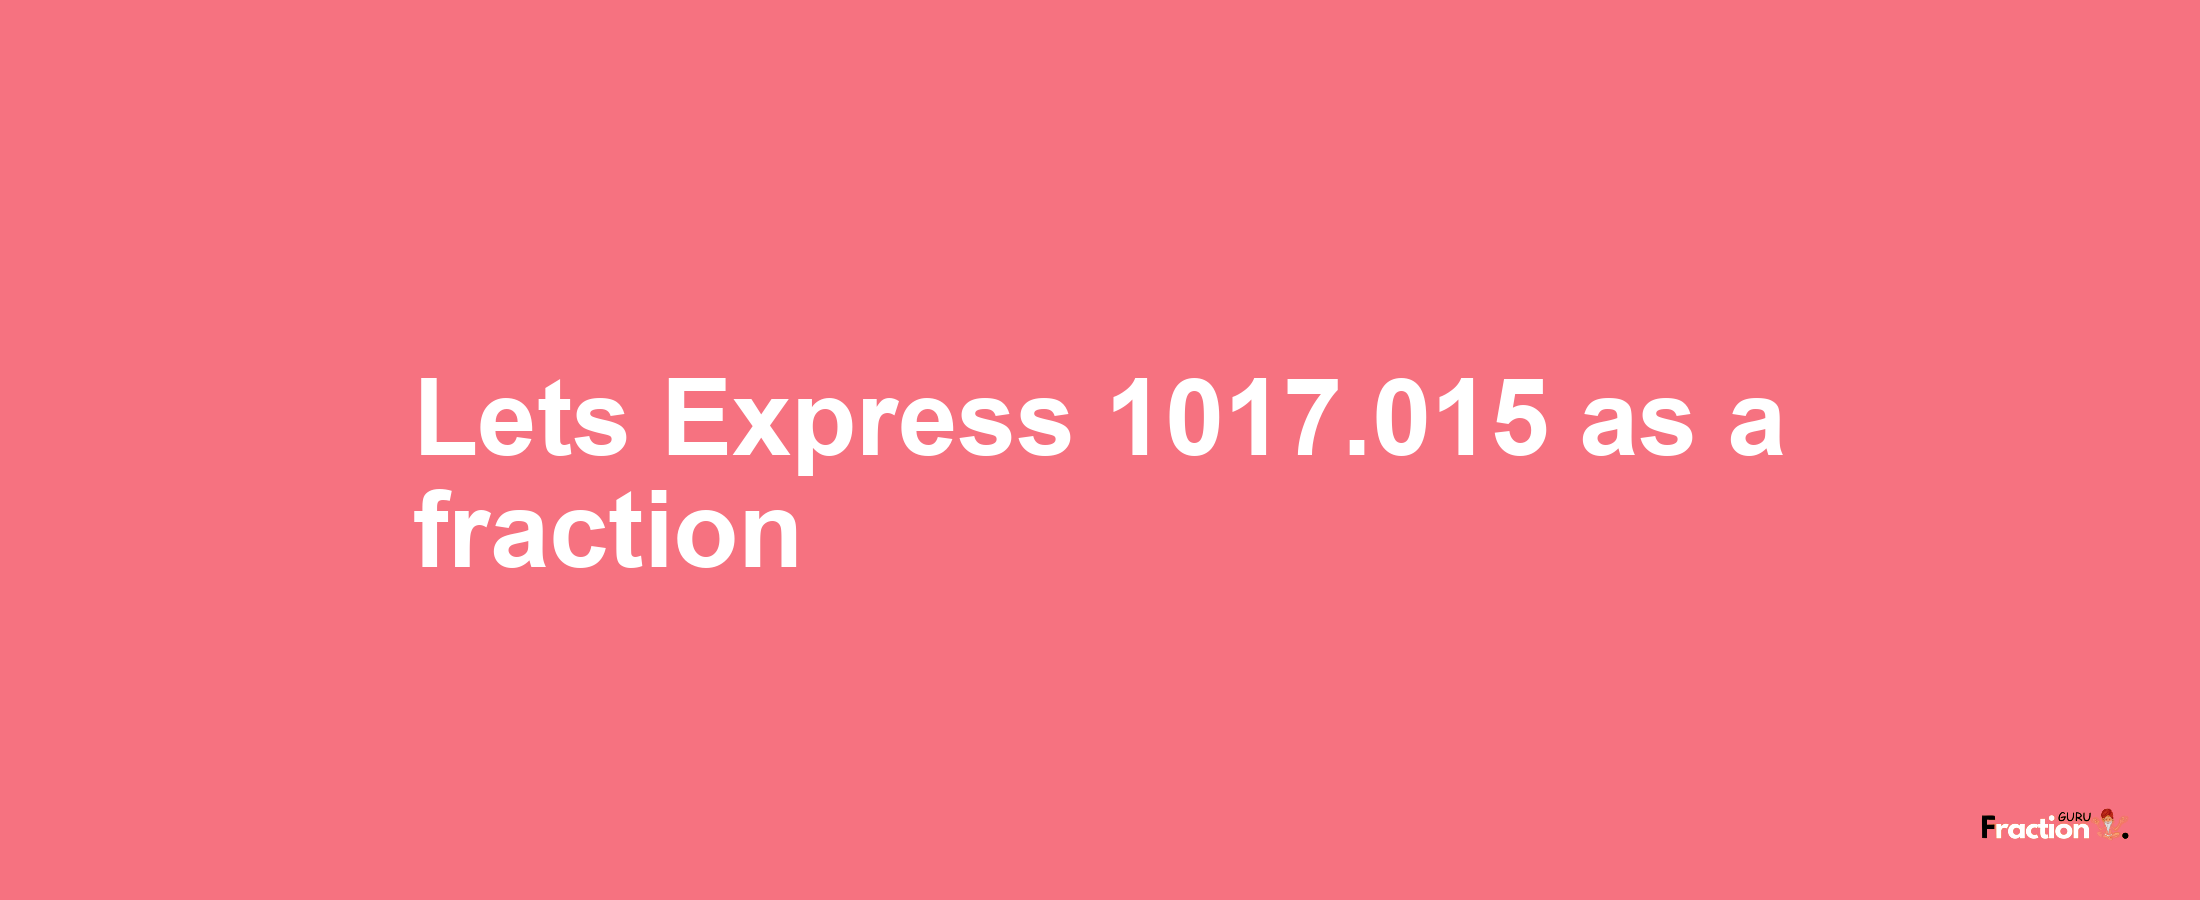 Lets Express 1017.015 as afraction